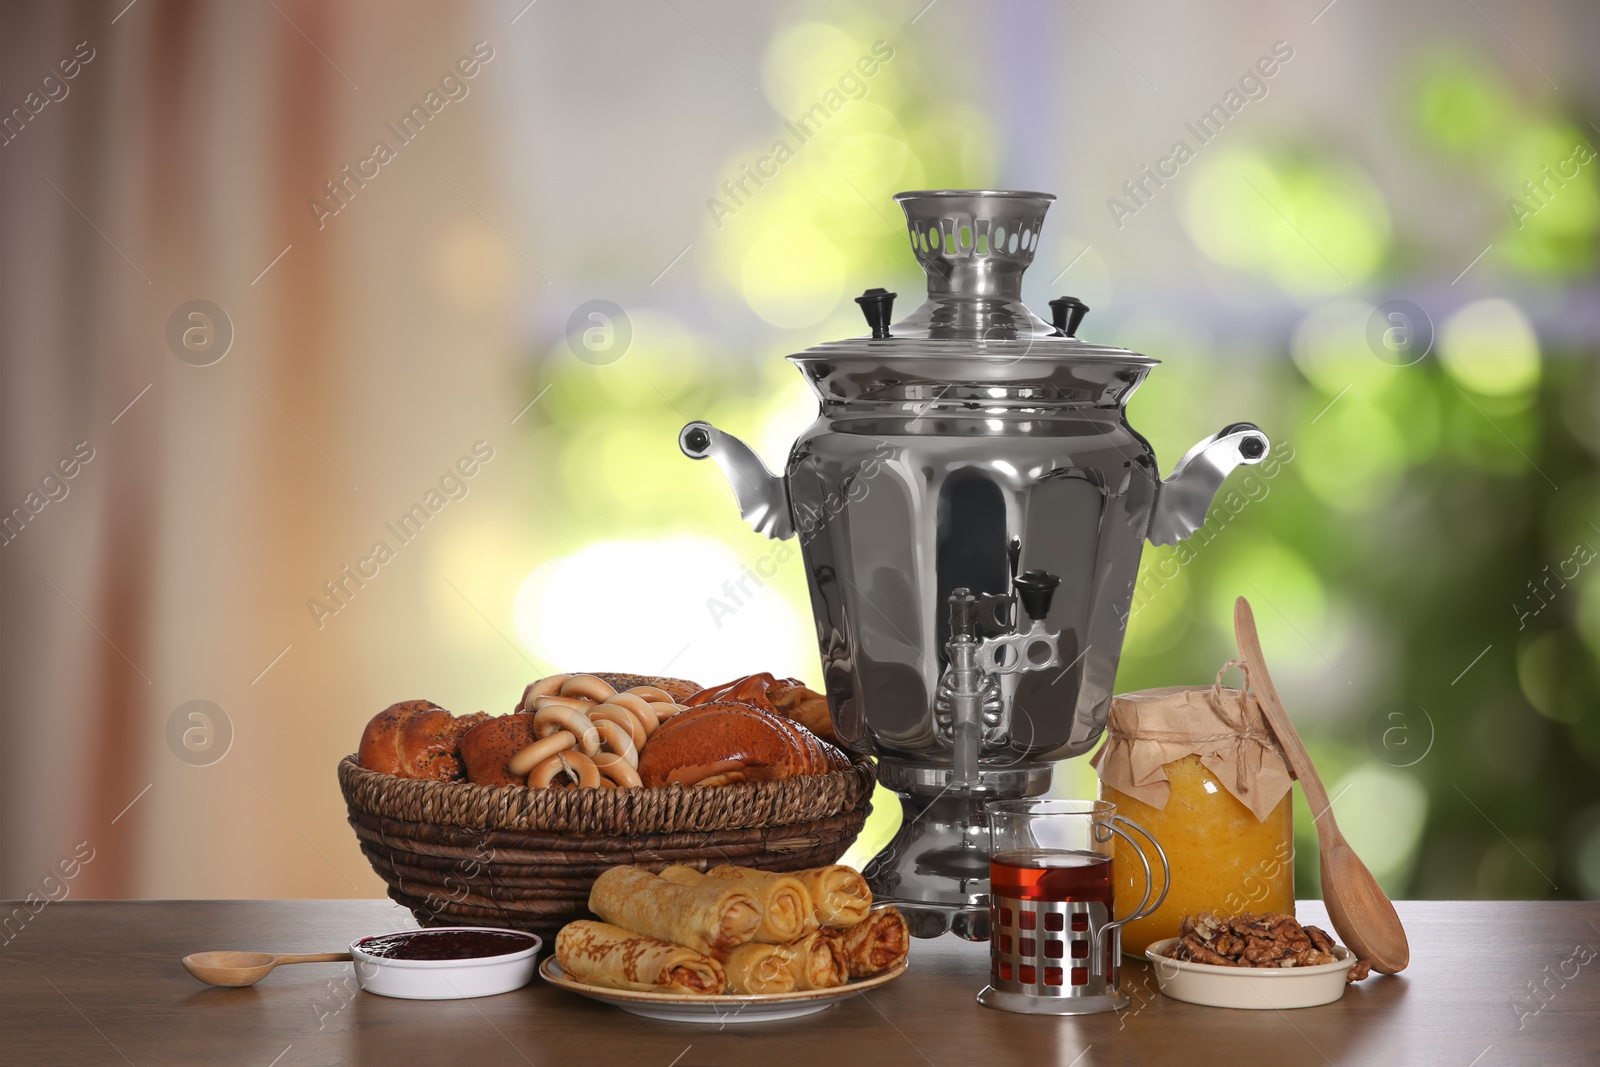 Image of Traditional Russian samovar and treats on wooden table against window in room